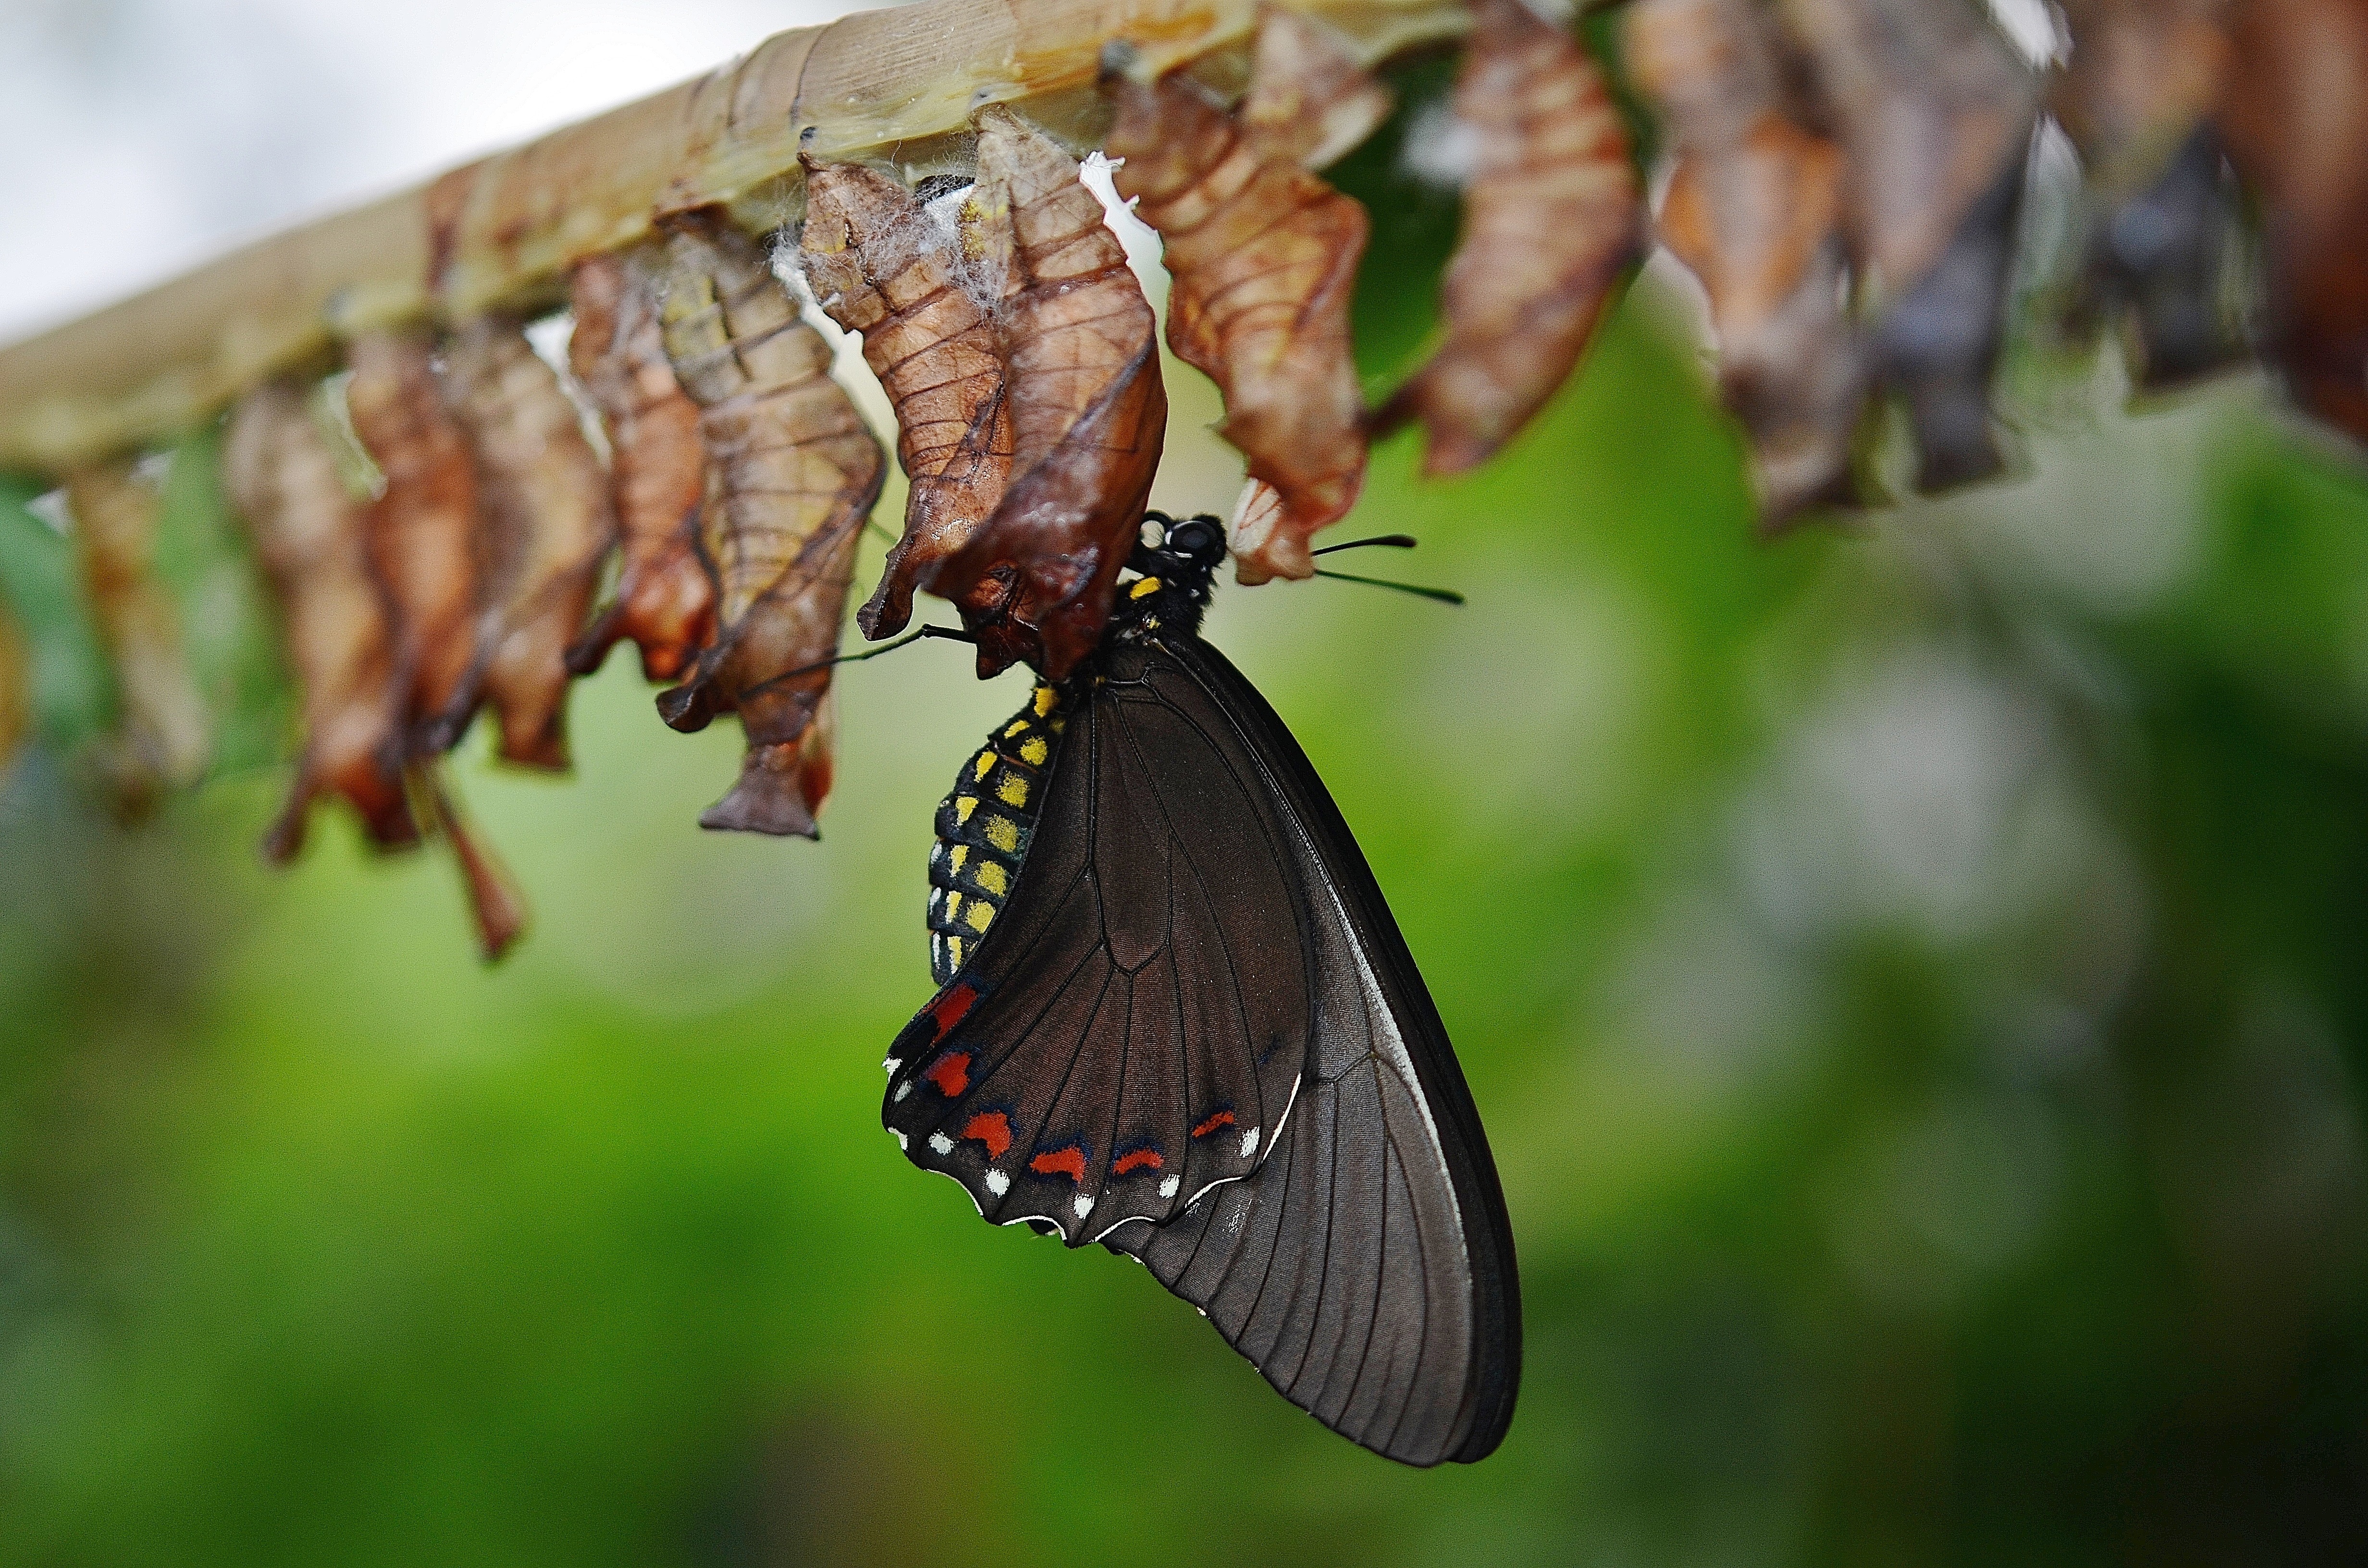 Tiger swallowtail butterfly and cocoons